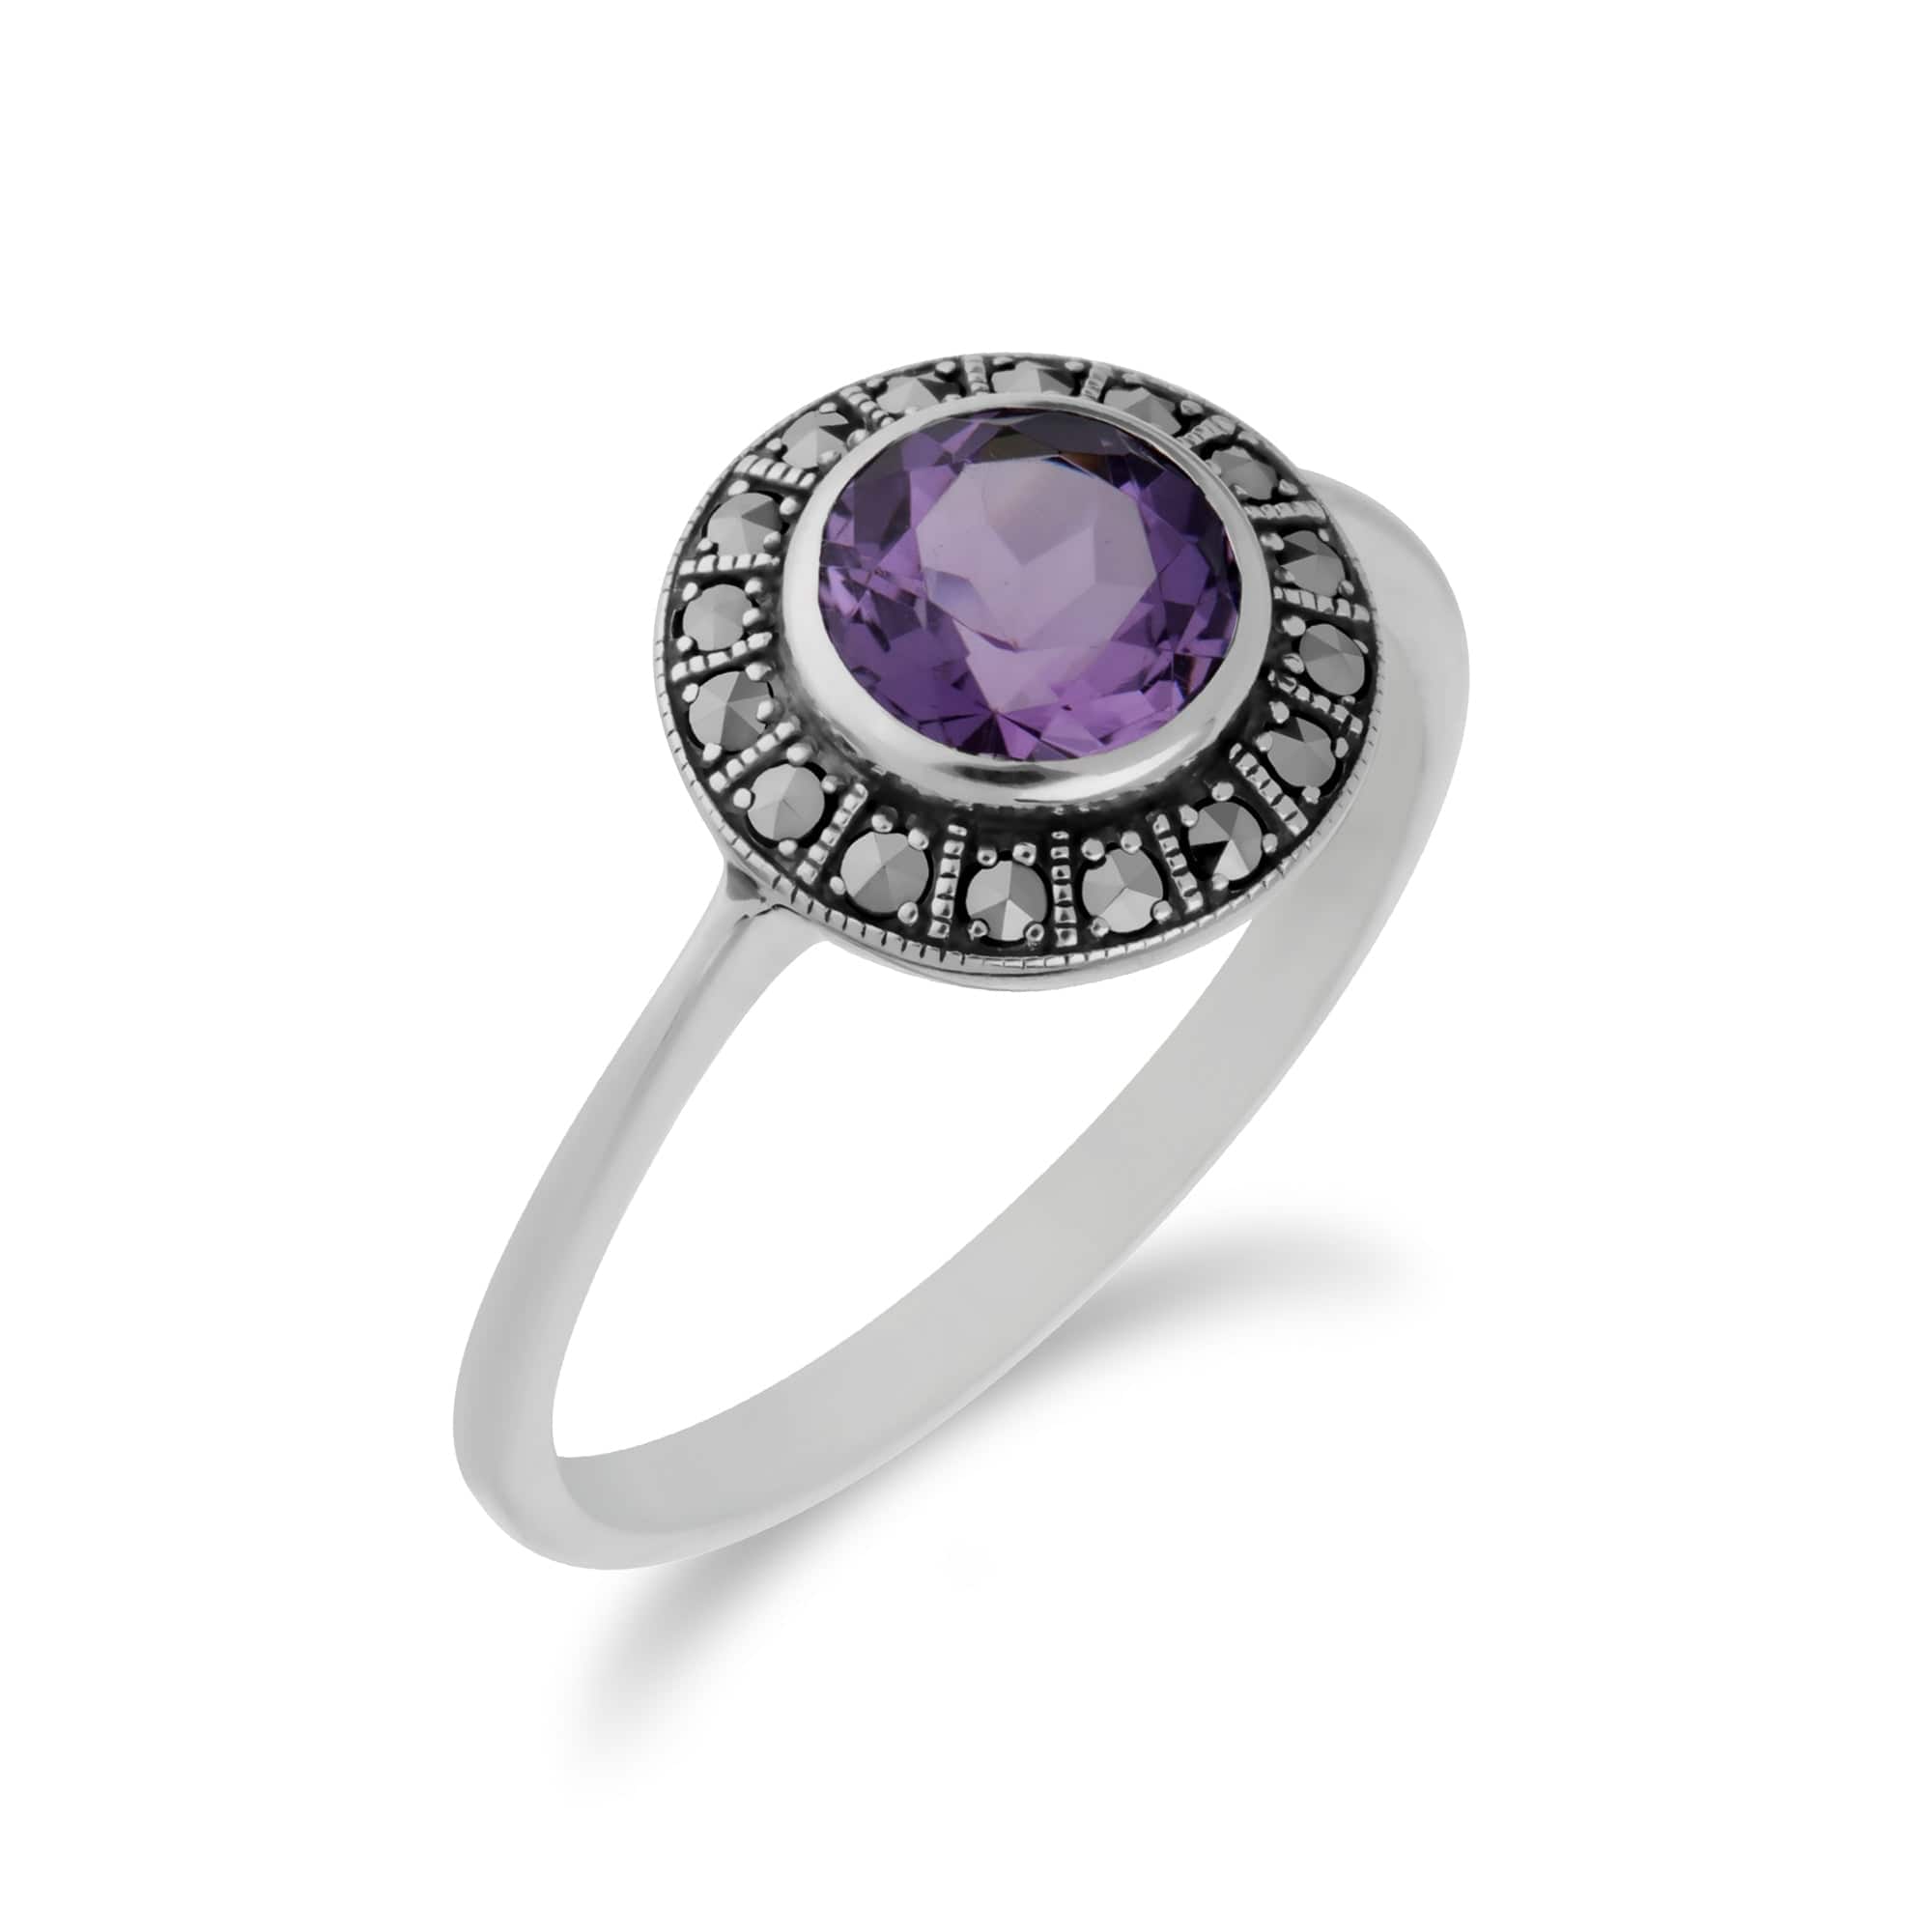 Art Deco Style Round Amethyst & Marcasite Halo Ring In Sterling Silver - Gemondo